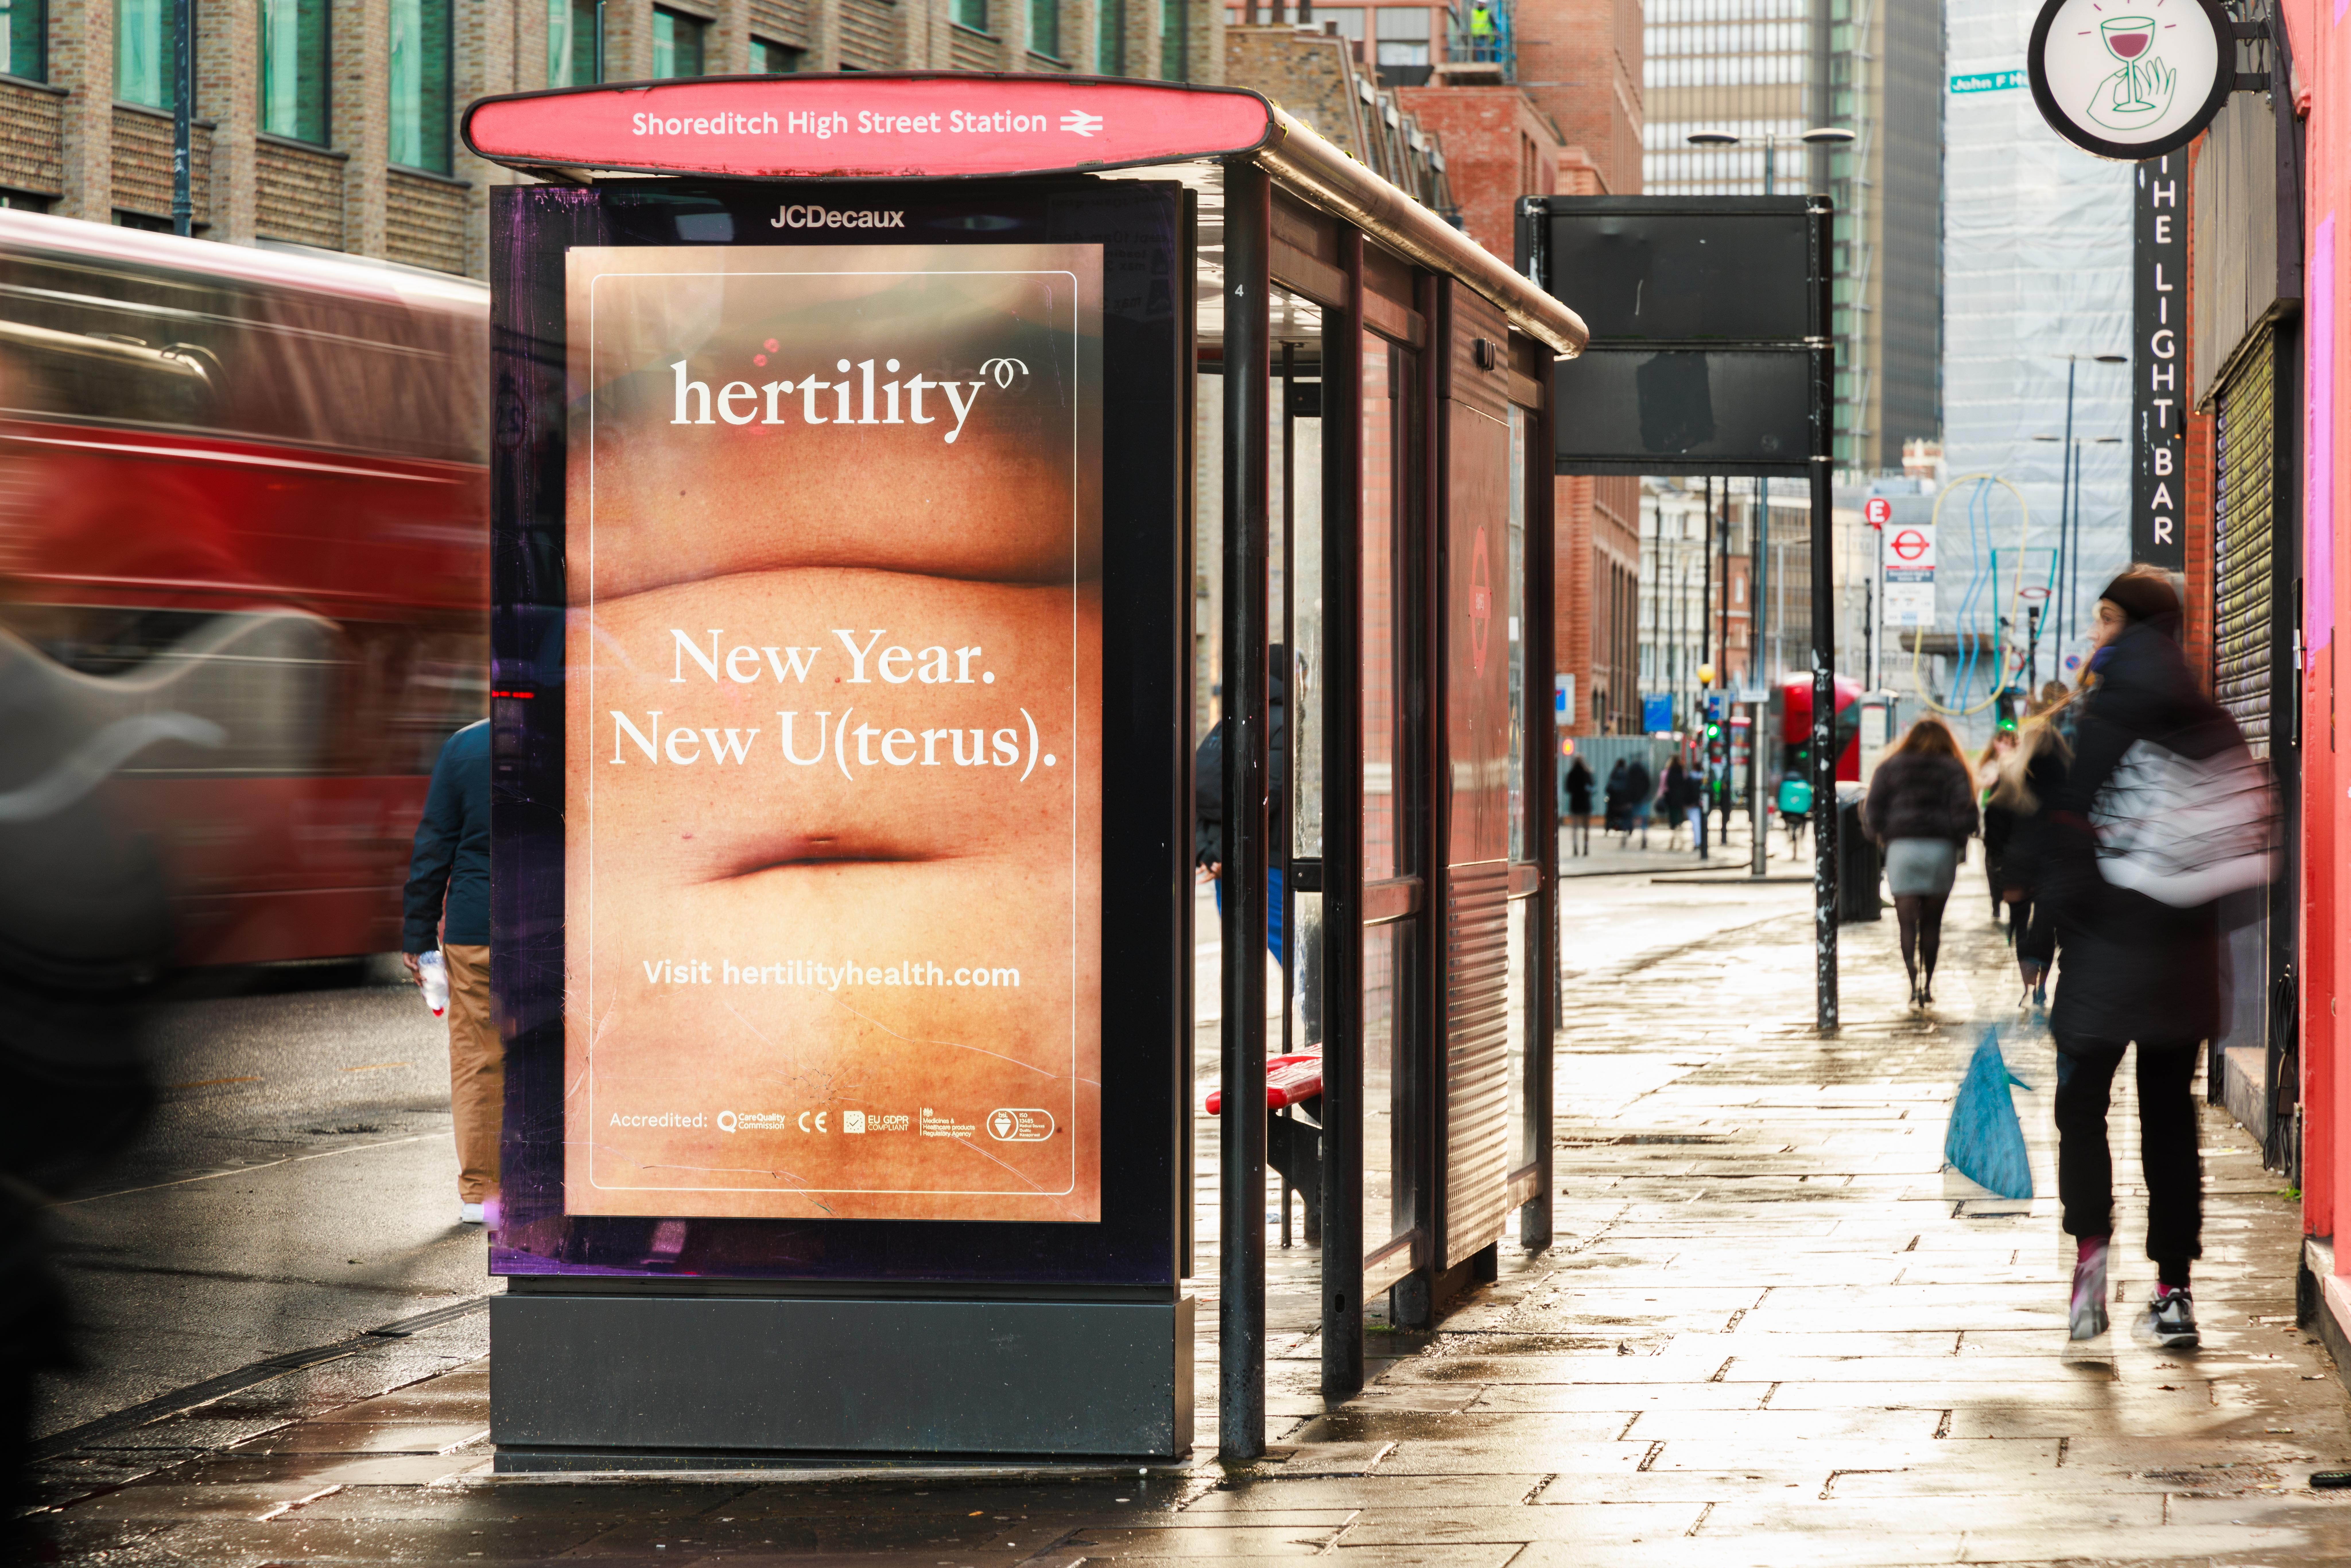 Hertility campaign on bus stop billboard